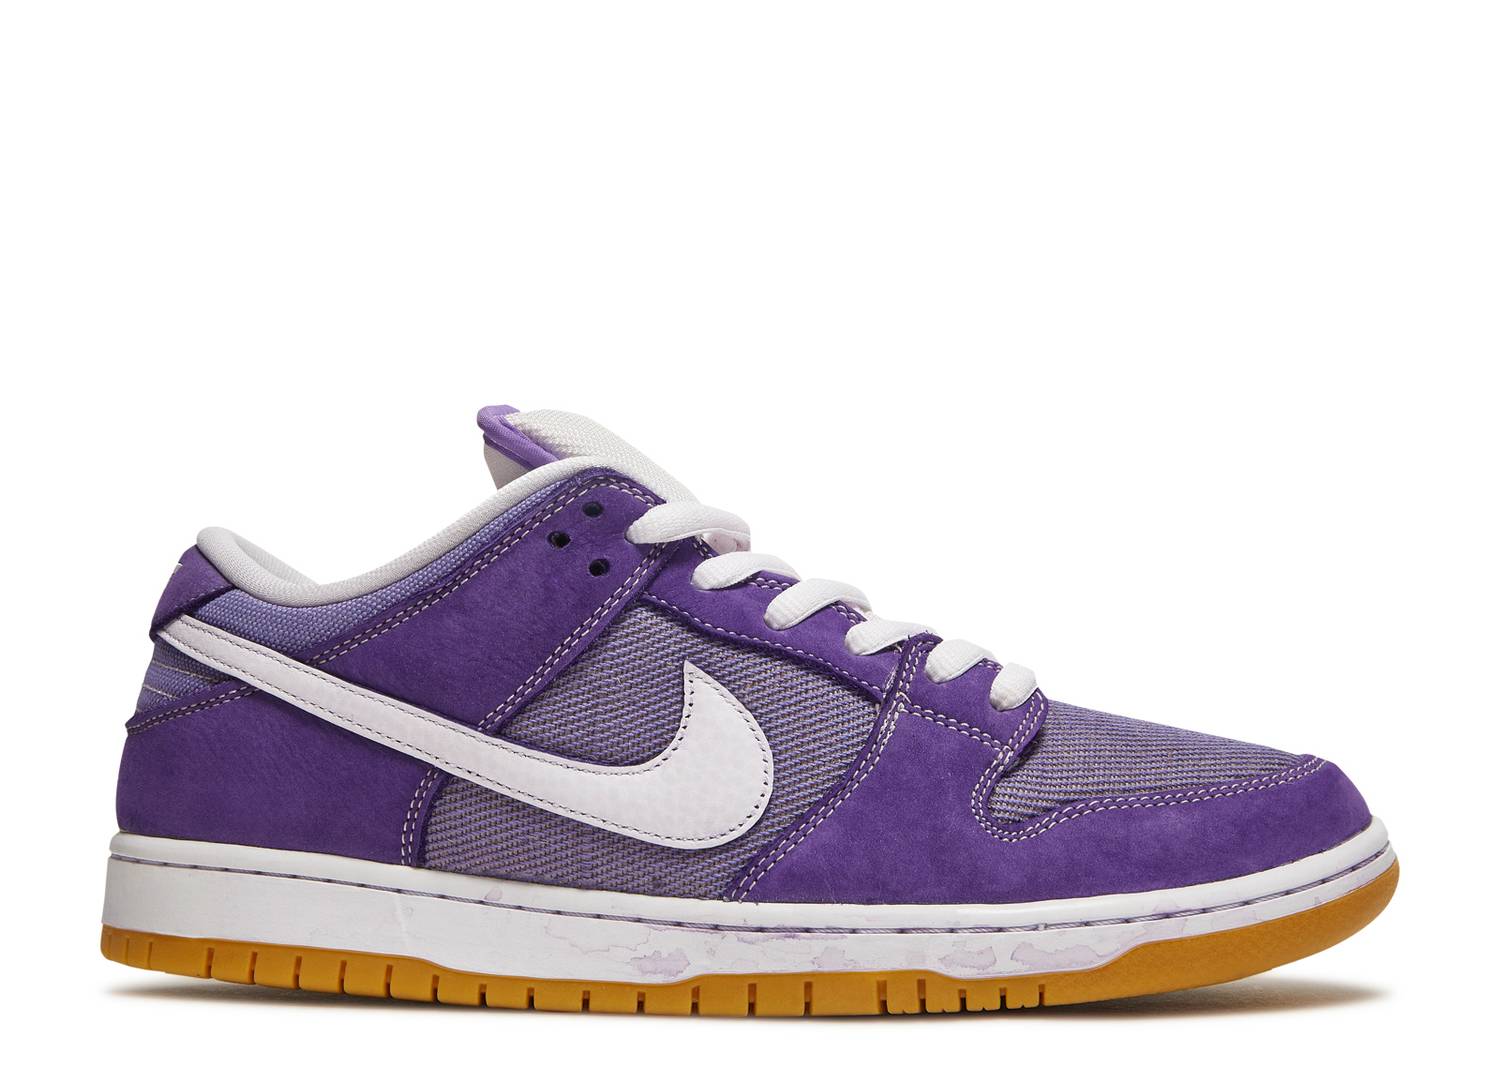 NIKE SB DUNK LOW “UNBLEACHED PACK LILAC”